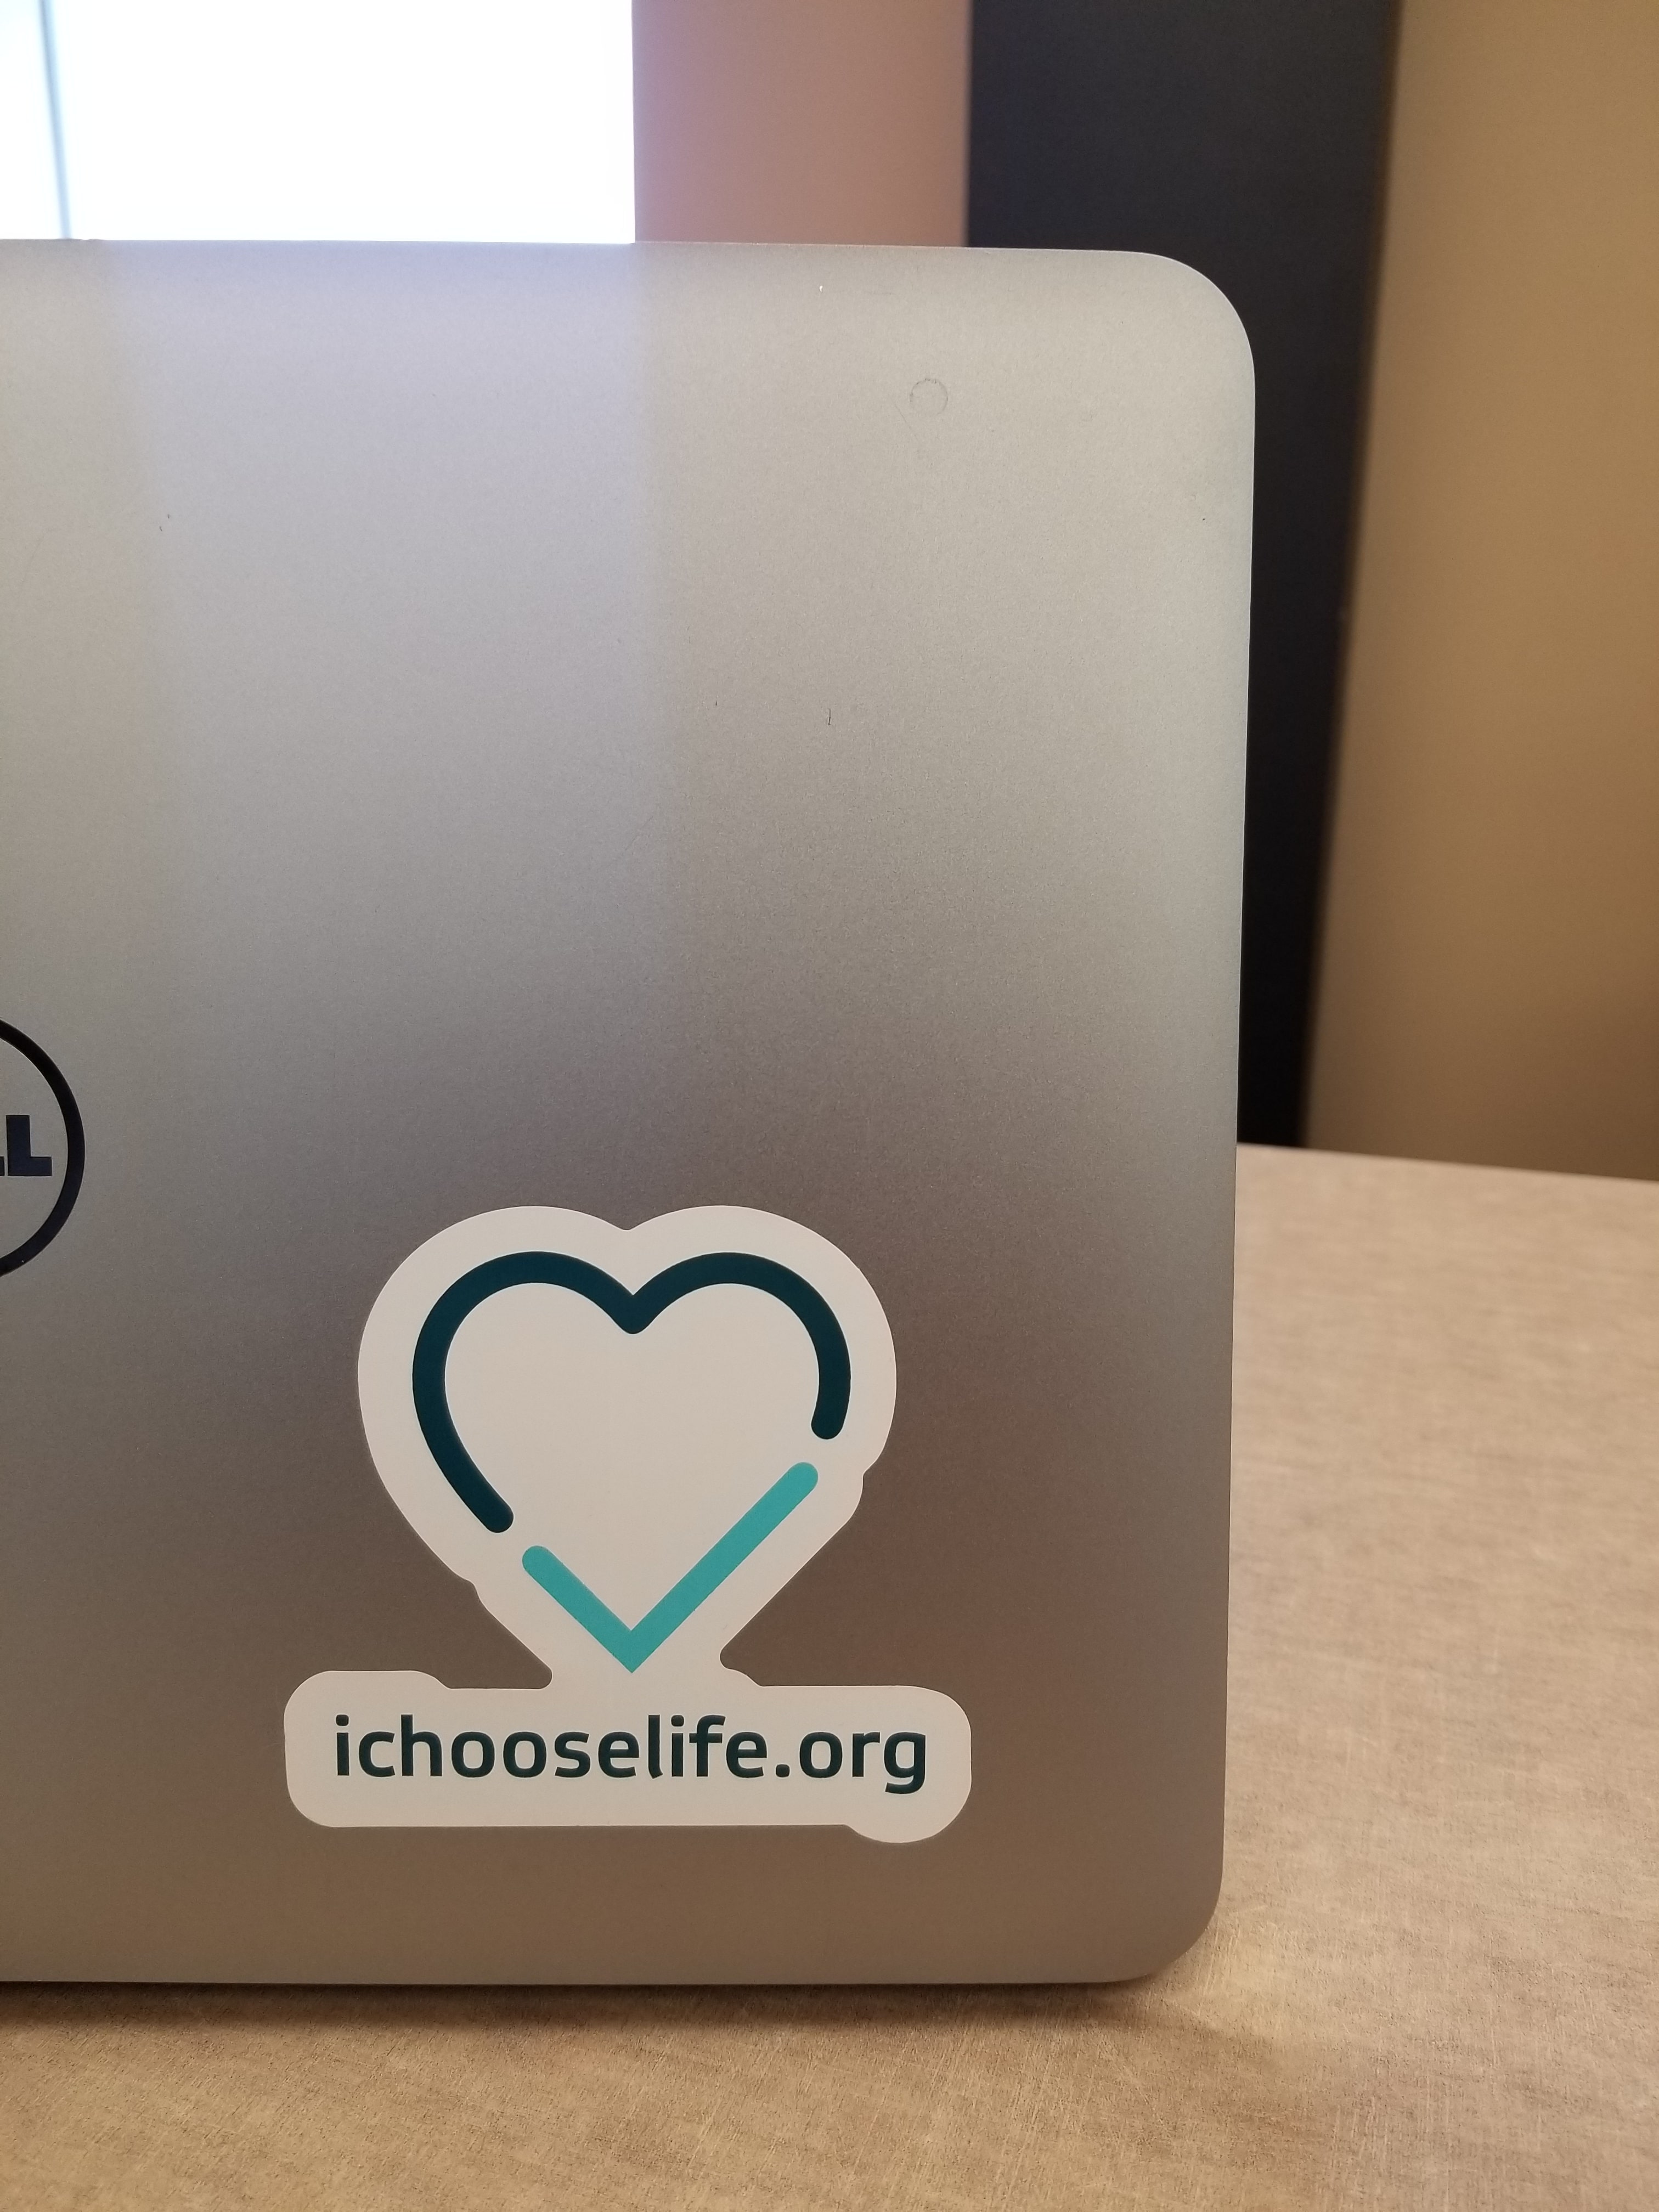 Sample decal shown on a laptop